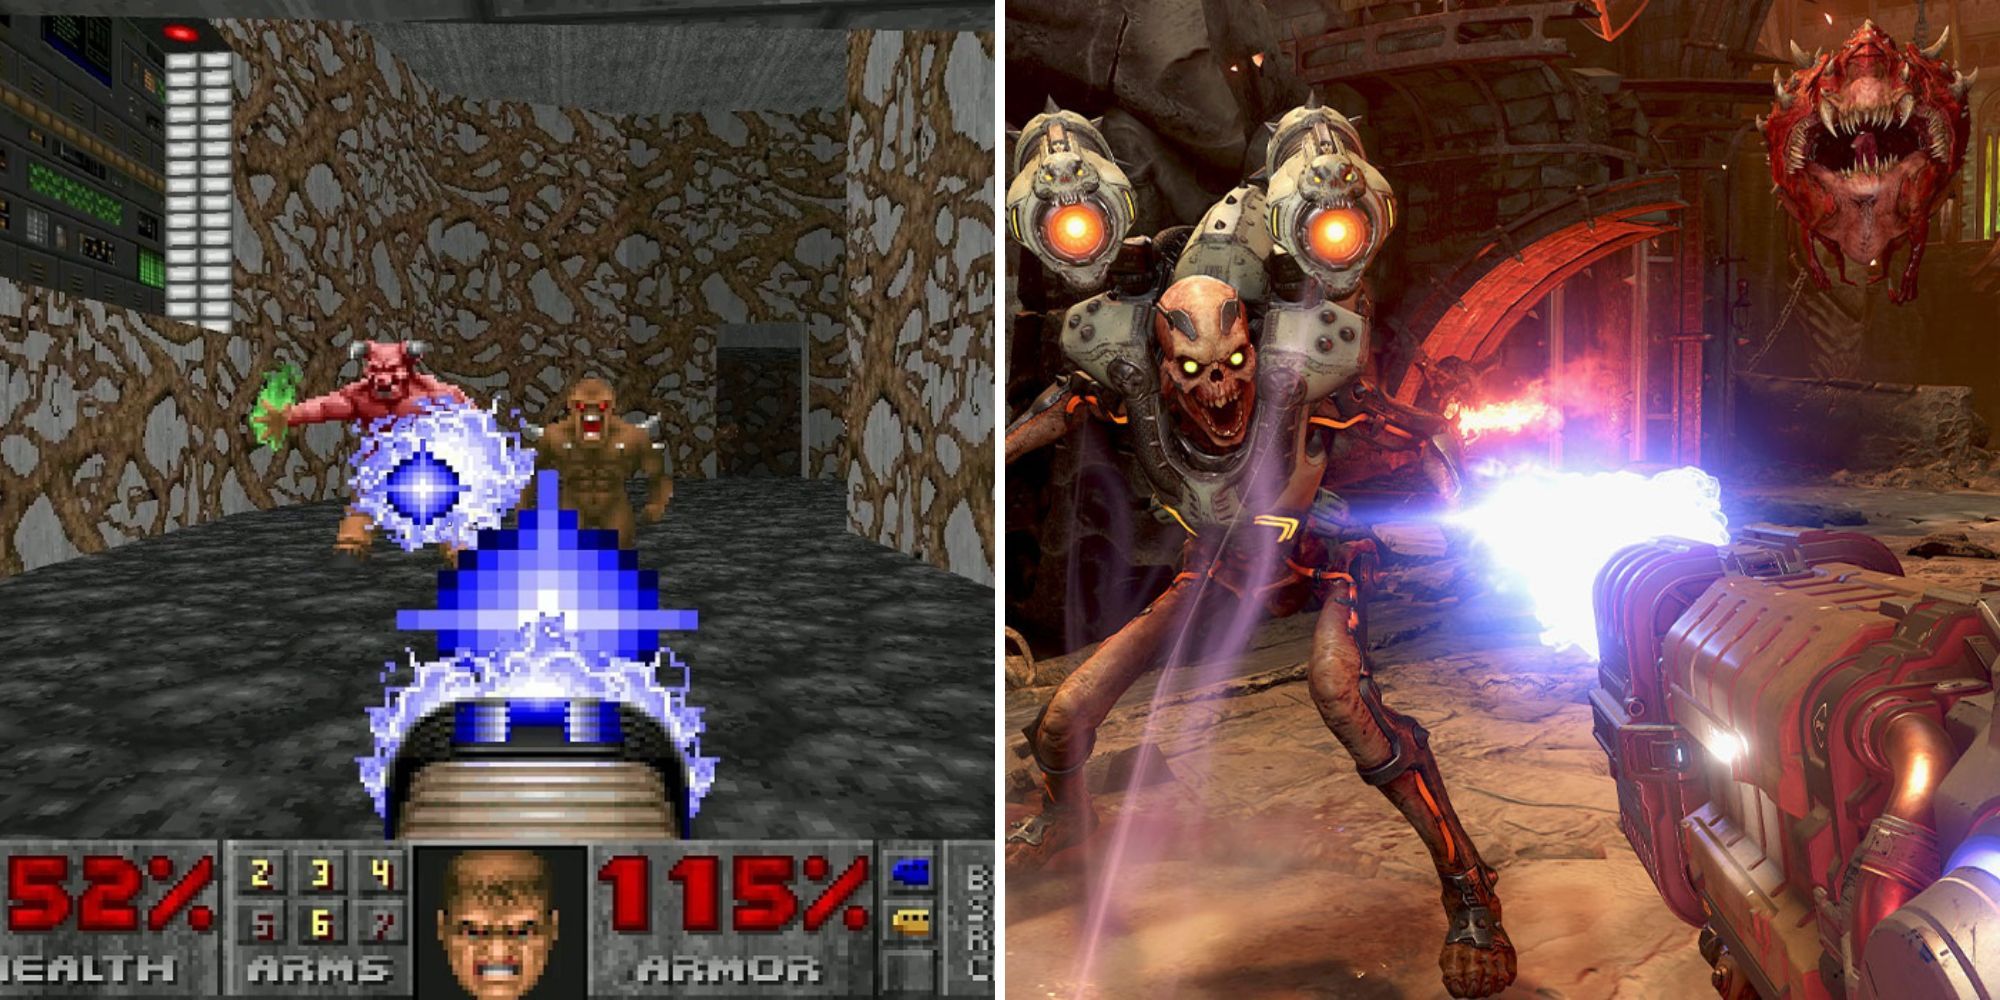 First image shows the original Doom game with Doomguy attacking enemies, second image shows the same but it is Doom Eternal